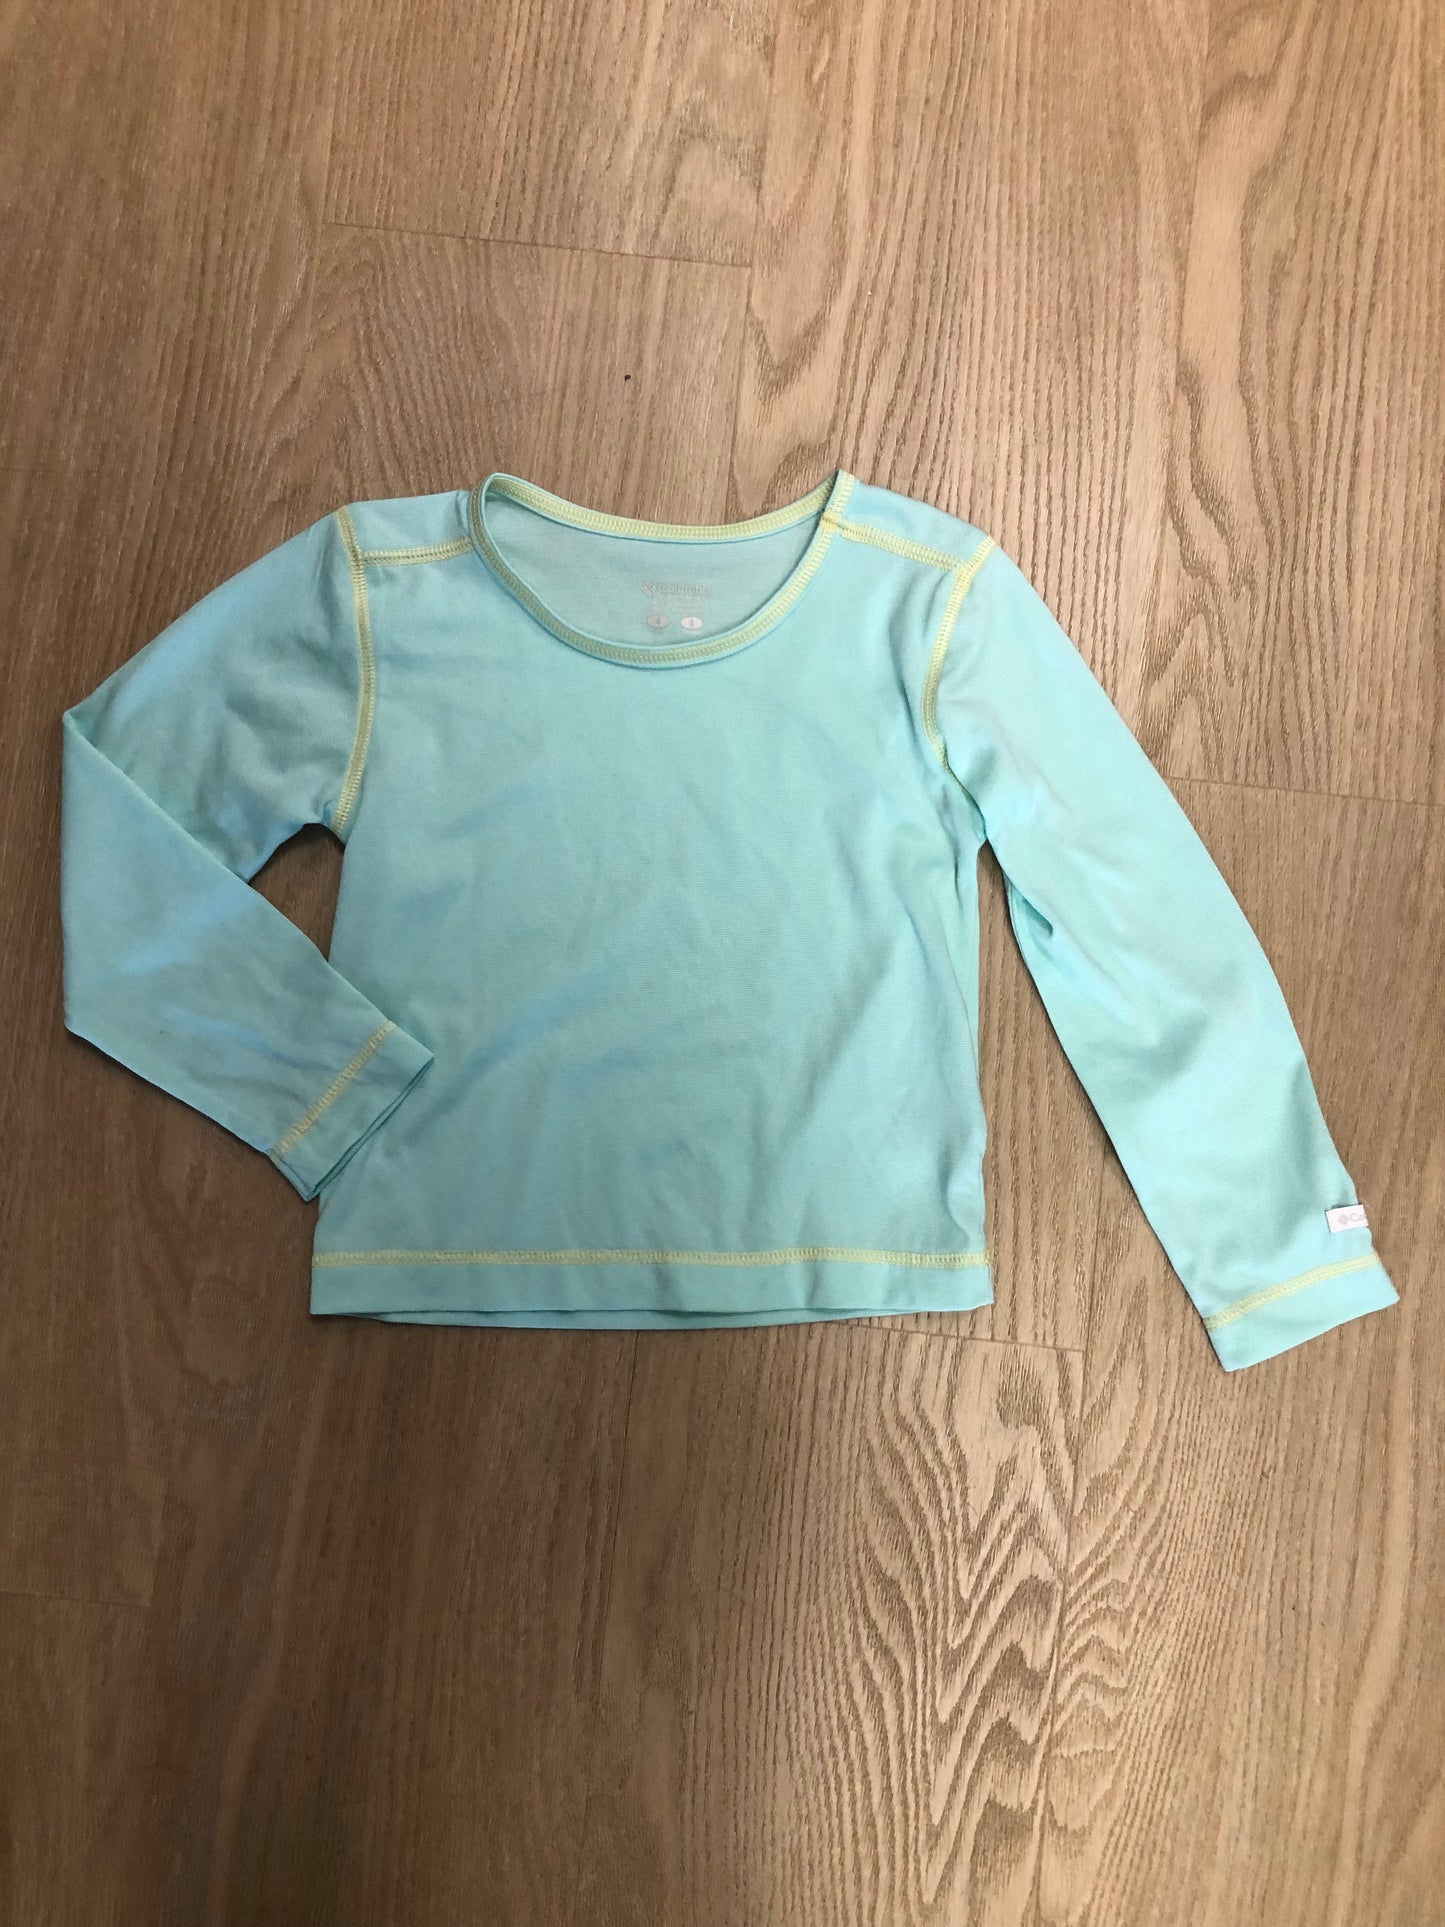 Columbia Child Size 4 Teal Shirt